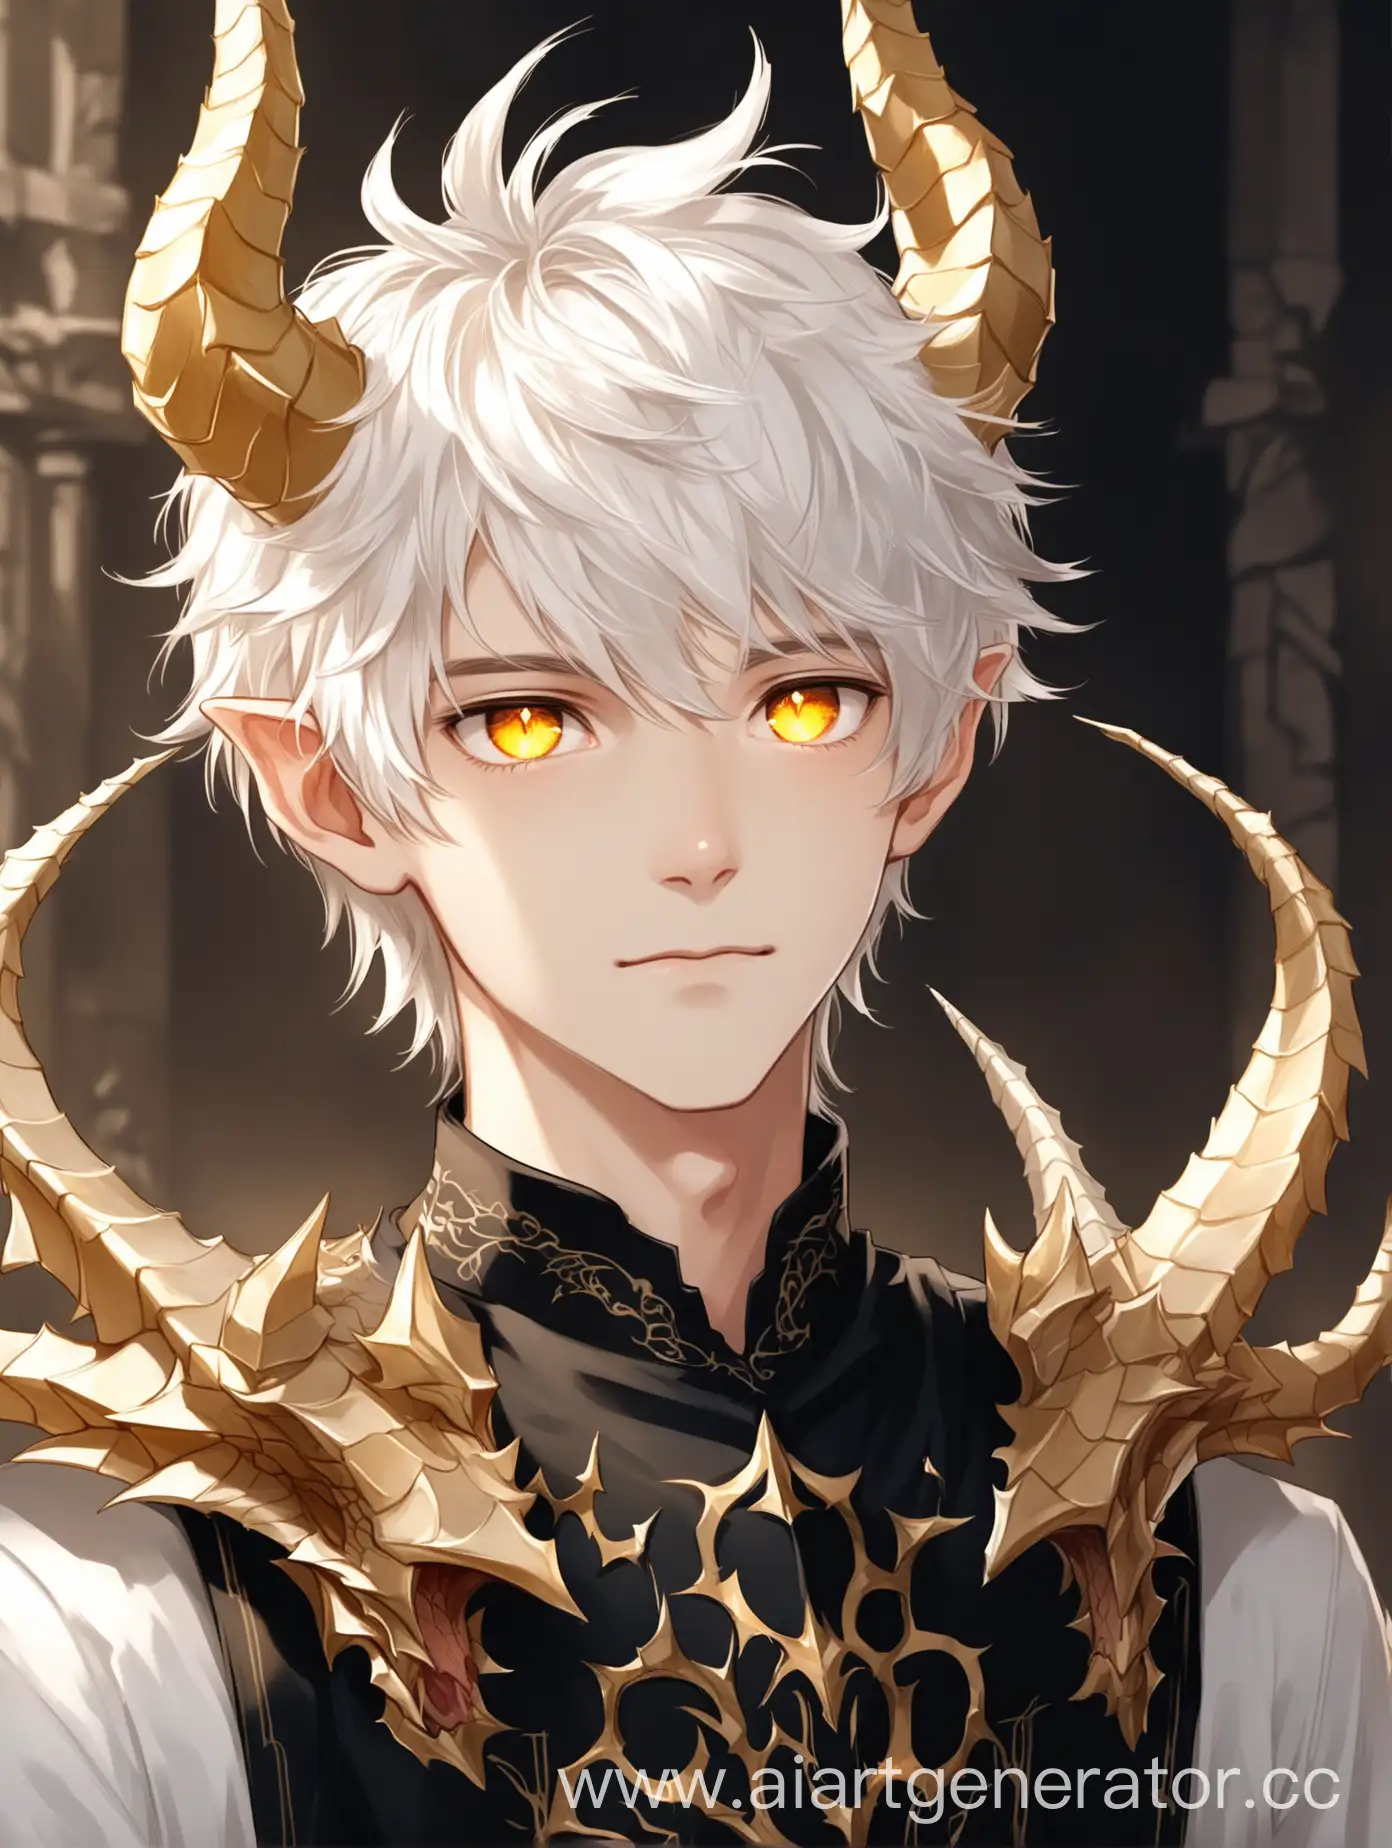 Charming-HalfDragon-Man-with-Golden-Eyes-and-White-Hair